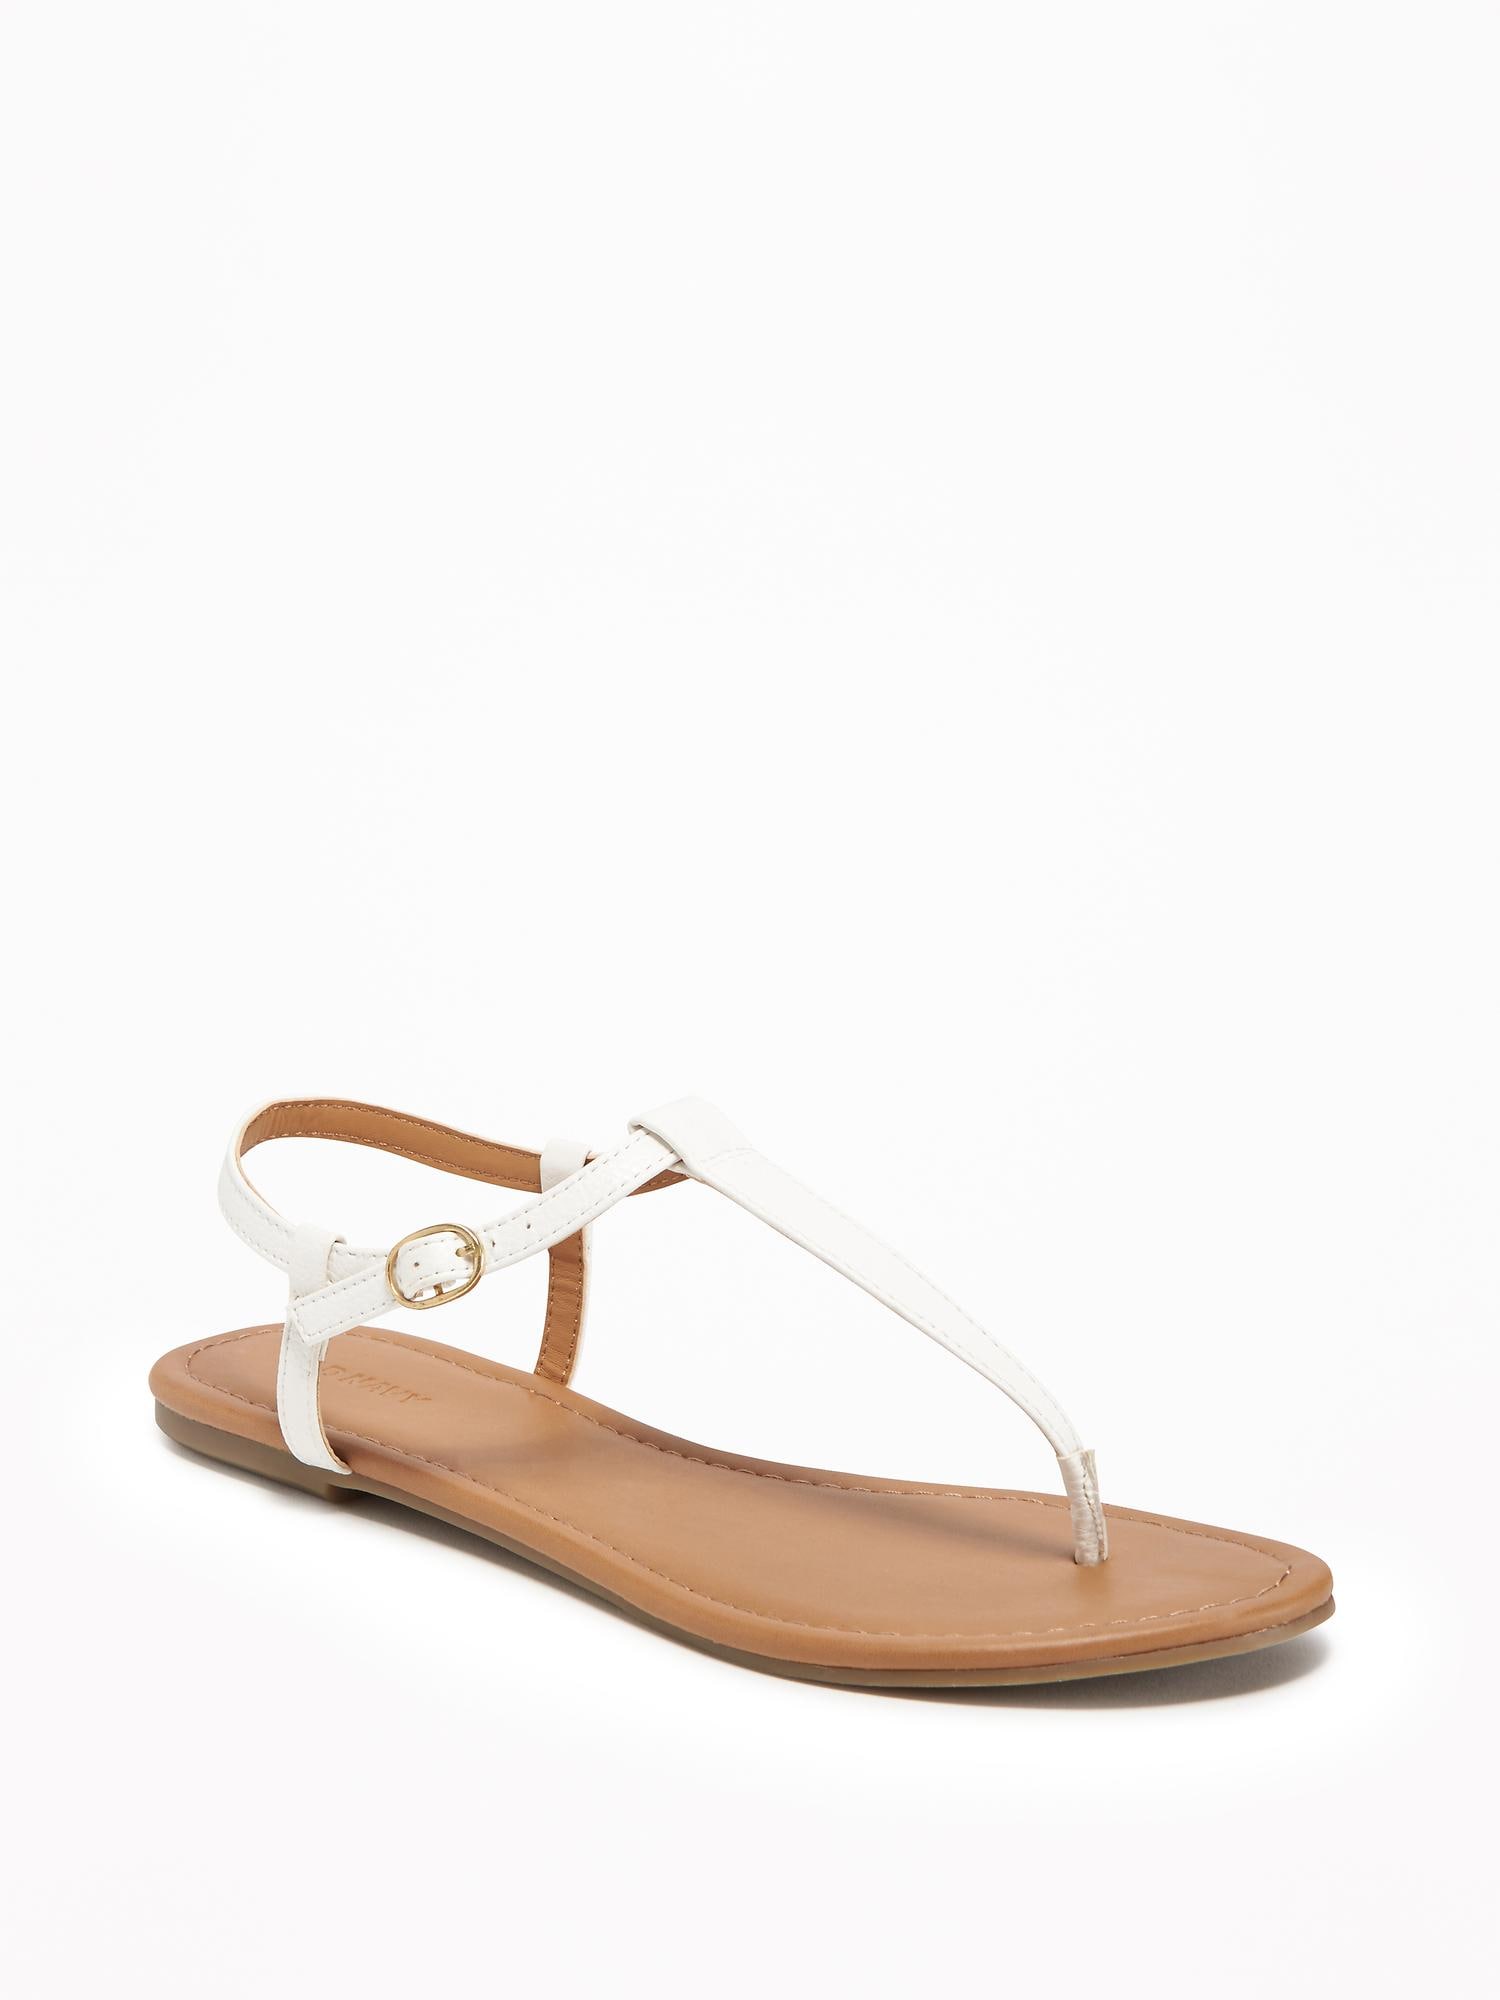 T-Strap Sandals for Women | Old Navy